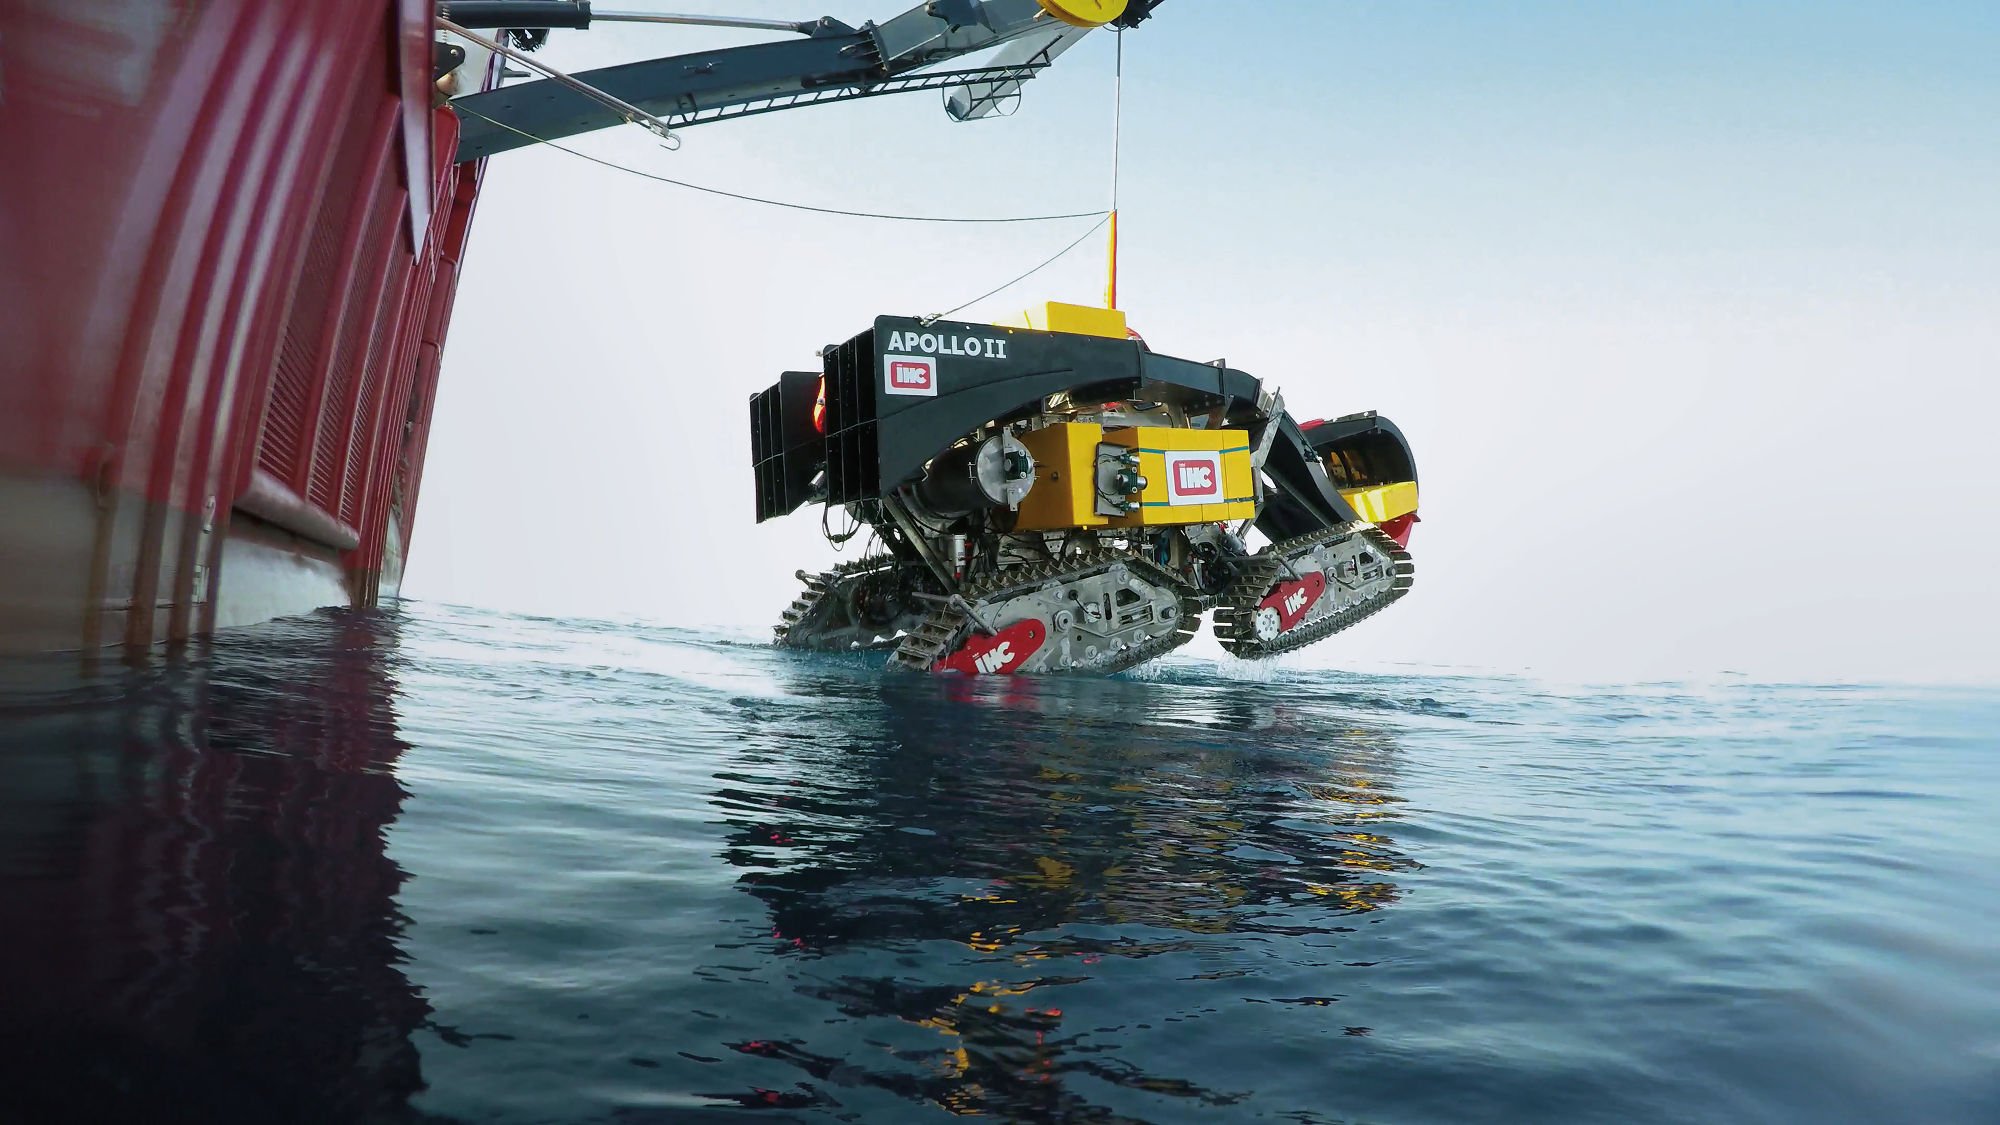 ROV in working: how to keep it this way and prevent downtime?